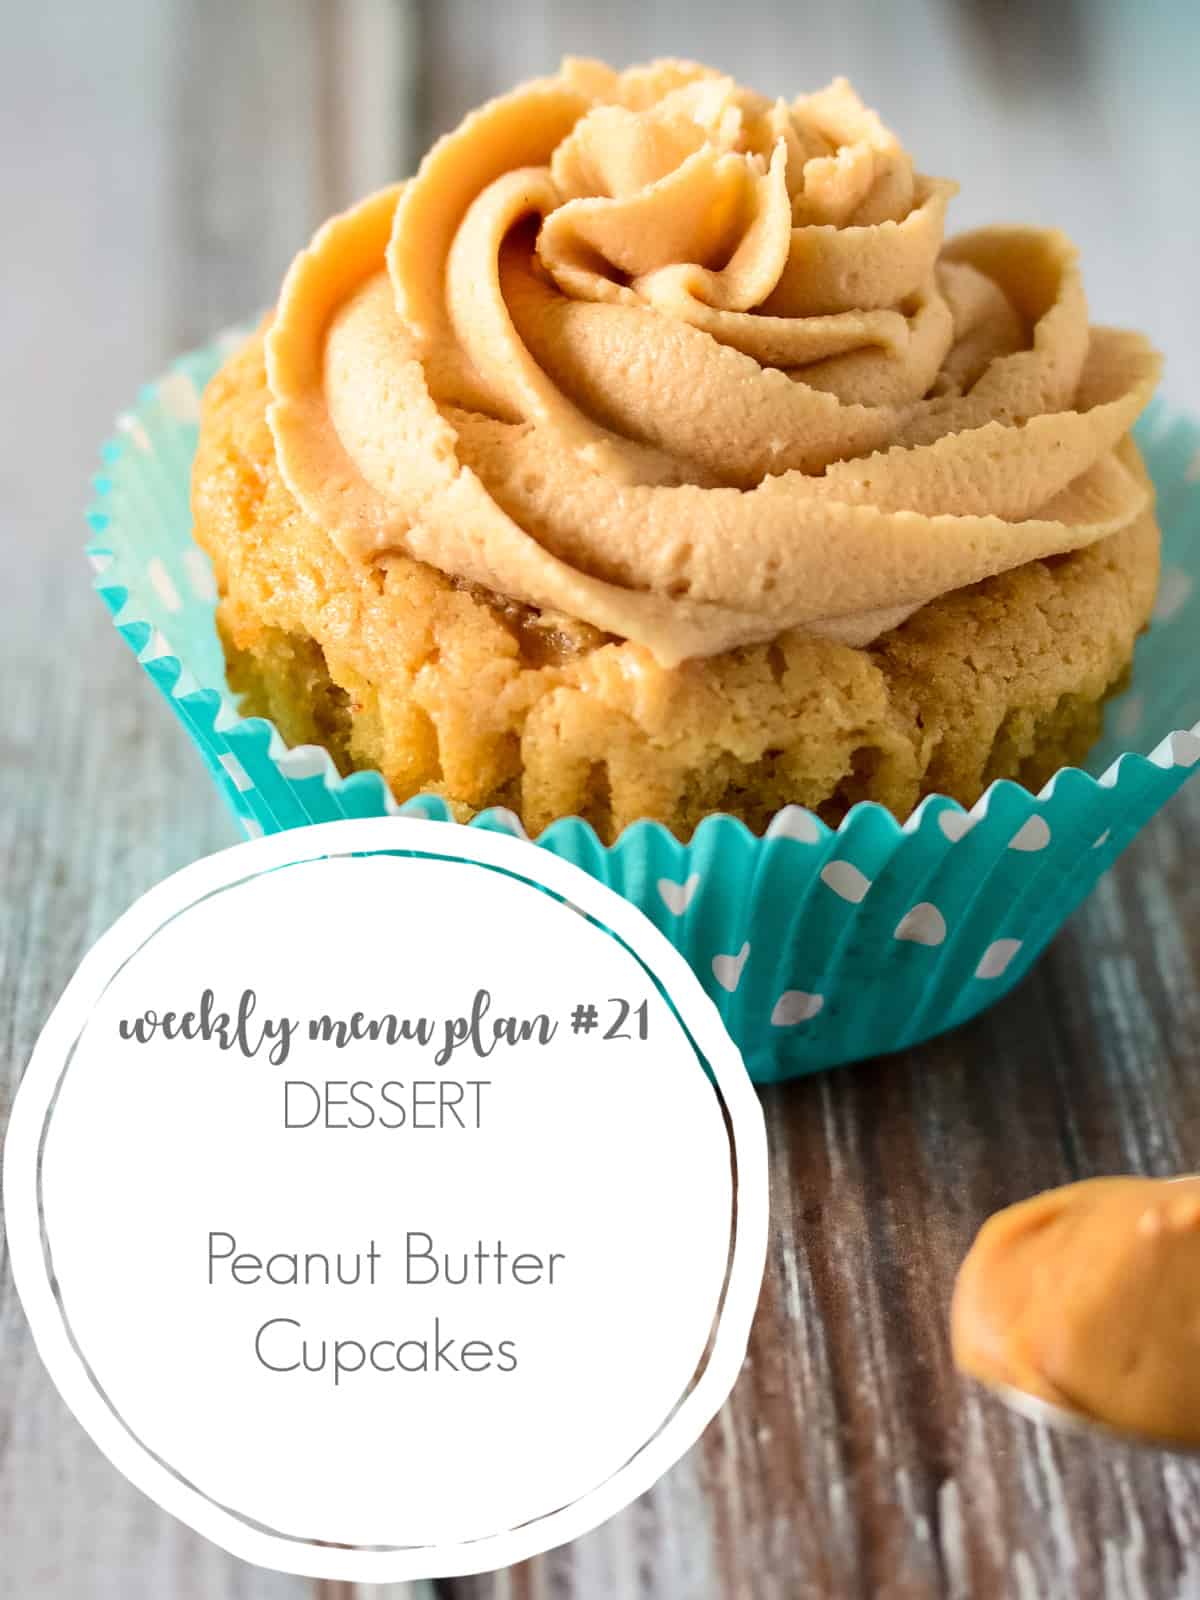 peanut butter cupcakes with peanut butter frosting